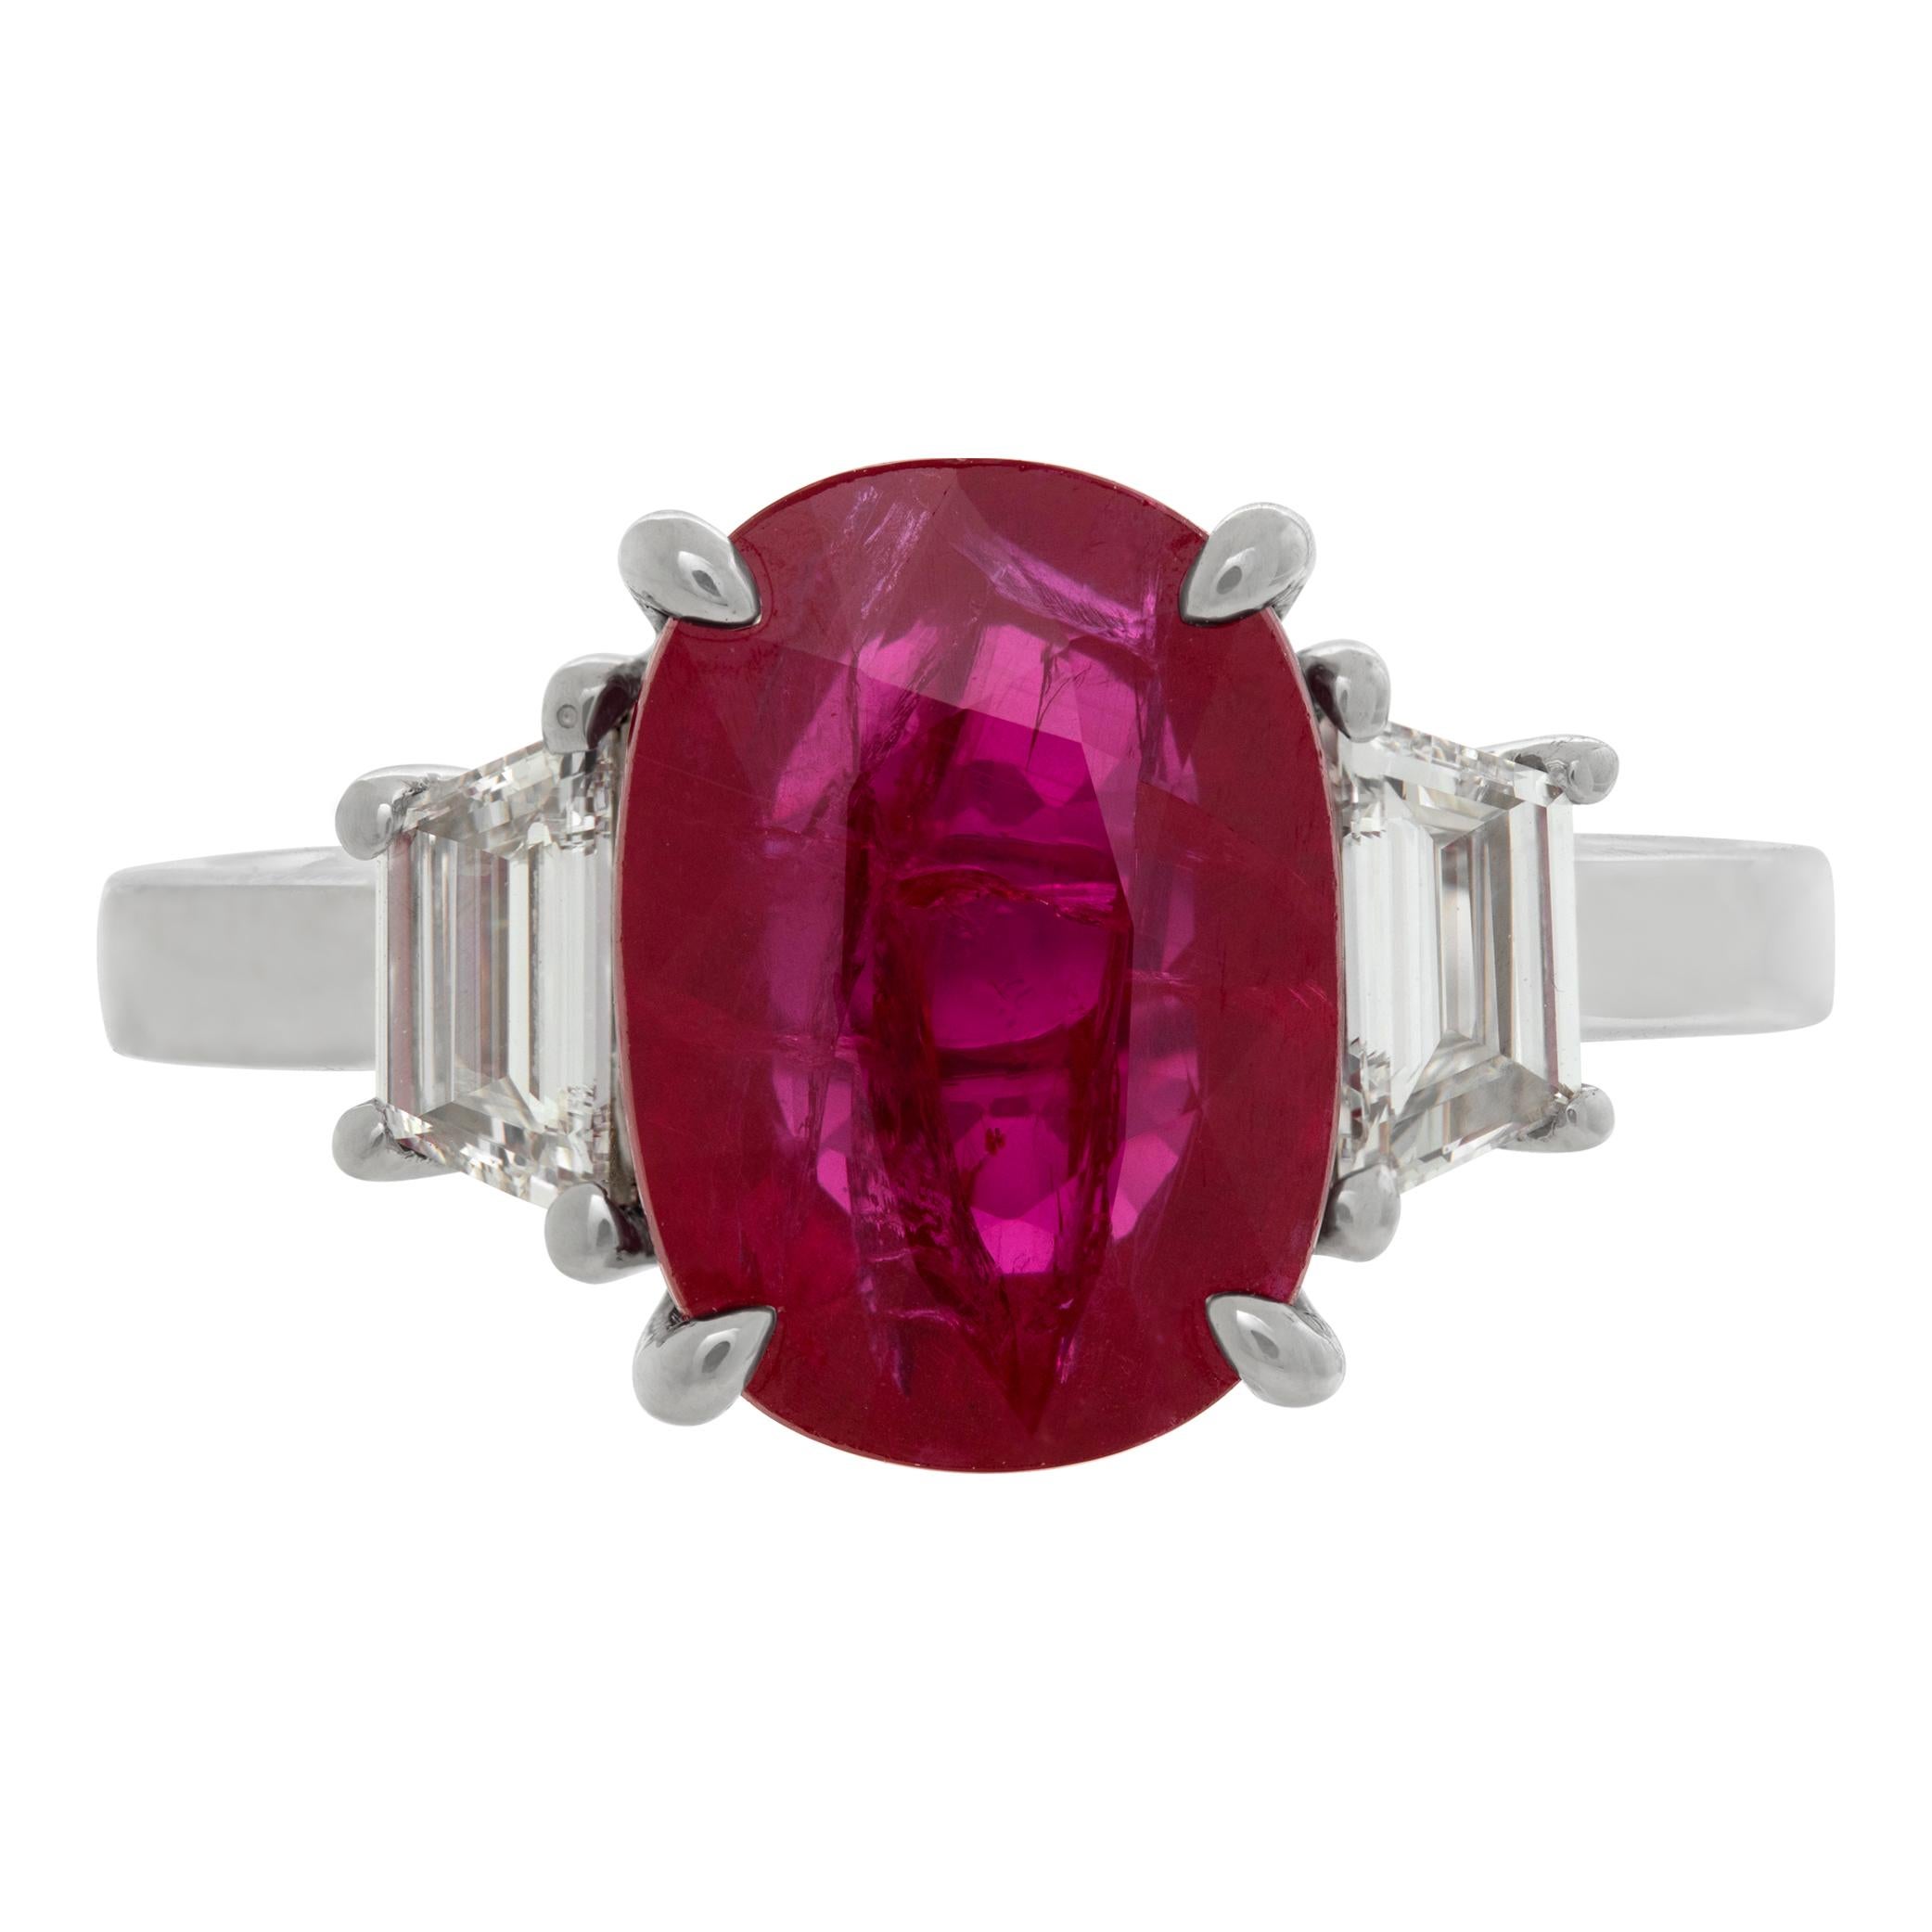 GIA Certified ruby & diamonds ring set in platinum. Brilliant oval cut ruby: 5.03 carats, with 2 trapezoid step cut diamonds, total approx. weight: 0.56 carat, estimate: G/H color- VVS/VS clarity. Size 7.This GIA certified ring is currently size 7